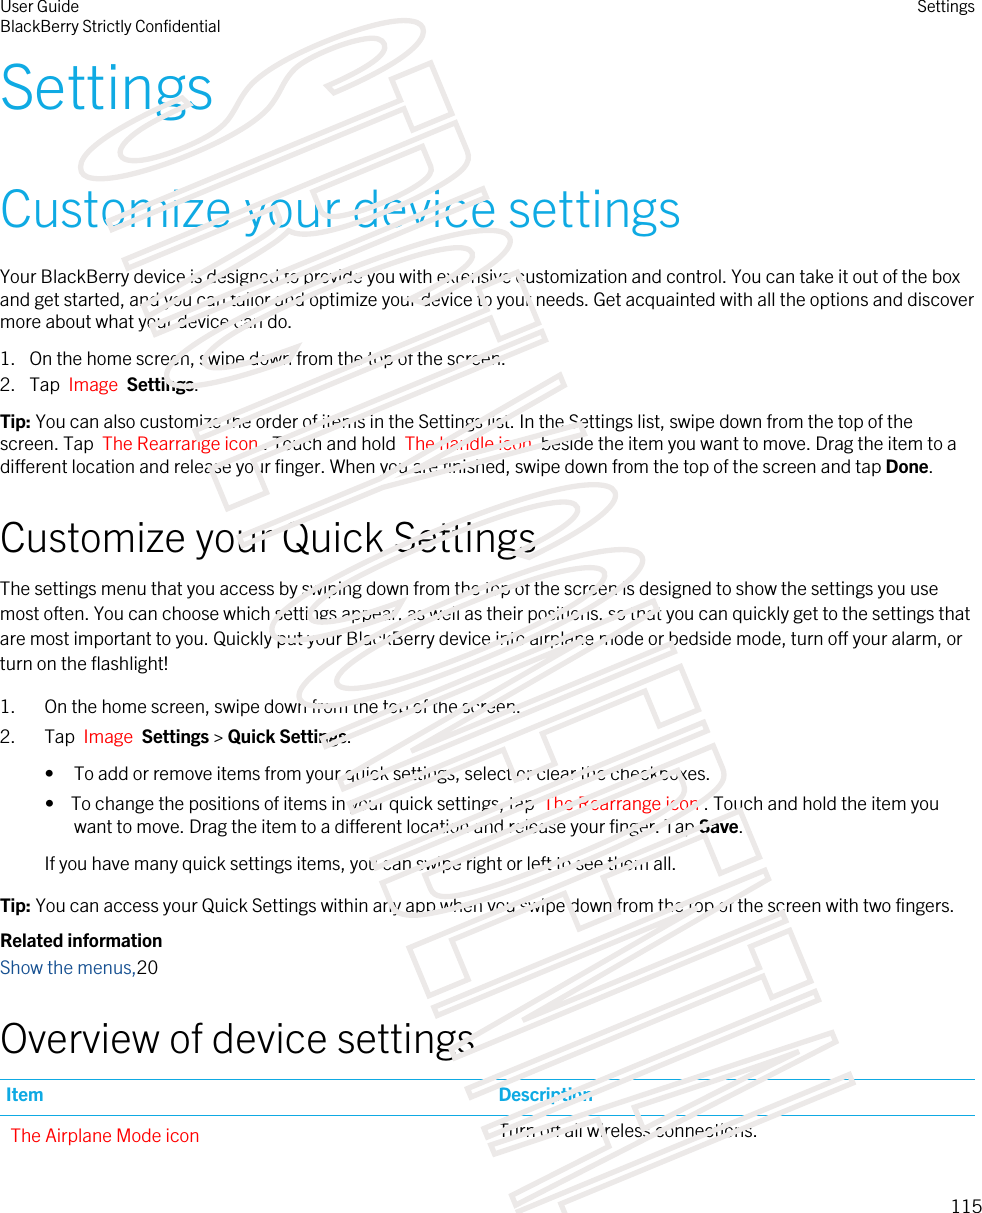 SettingsCustomize your device settingsYour BlackBerry device is designed to provide you with extensive customization and control. You can take it out of the box and get started, and you can tailor and optimize your device to your needs. Get acquainted with all the options and discover more about what your device can do.1. On the home screen, swipe down from the top of the screen.2. Tap  Image  Settings.Tip: You can also customize the order of items in the Settings list. In the Settings list, swipe down from the top of the screen. Tap  The Rearrange icon . Touch and hold  The handle icon  beside the item you want to move. Drag the item to a different location and release your finger. When you are finished, swipe down from the top of the screen and tap Done.Customize your Quick SettingsThe settings menu that you access by swiping down from the top of the screen is designed to show the settings you use most often. You can choose which settings appear, as well as their positions, so that you can quickly get to the settings that are most important to you. Quickly put your BlackBerry device into airplane mode or bedside mode, turn off your alarm, or turn on the flashlight!1. On the home screen, swipe down from the top of the screen.2. Tap  Image  Settings &gt; Quick Settings.• To add or remove items from your quick settings, select or clear the checkboxes.•  To change the positions of items in your quick settings, tap  The Rearrange icon . Touch and hold the item you want to move. Drag the item to a different location and release your finger. Tap Save.If you have many quick settings items, you can swipe right or left to see them all.Tip: You can access your Quick Settings within any app when you swipe down from the top of the screen with two fingers.Related informationShow the menus,20Overview of device settingsItem DescriptionThe Airplane Mode icon Turn off all wireless connections.User GuideBlackBerry Strictly Confidential Settings115STRICTLY CONFIDENTIAL